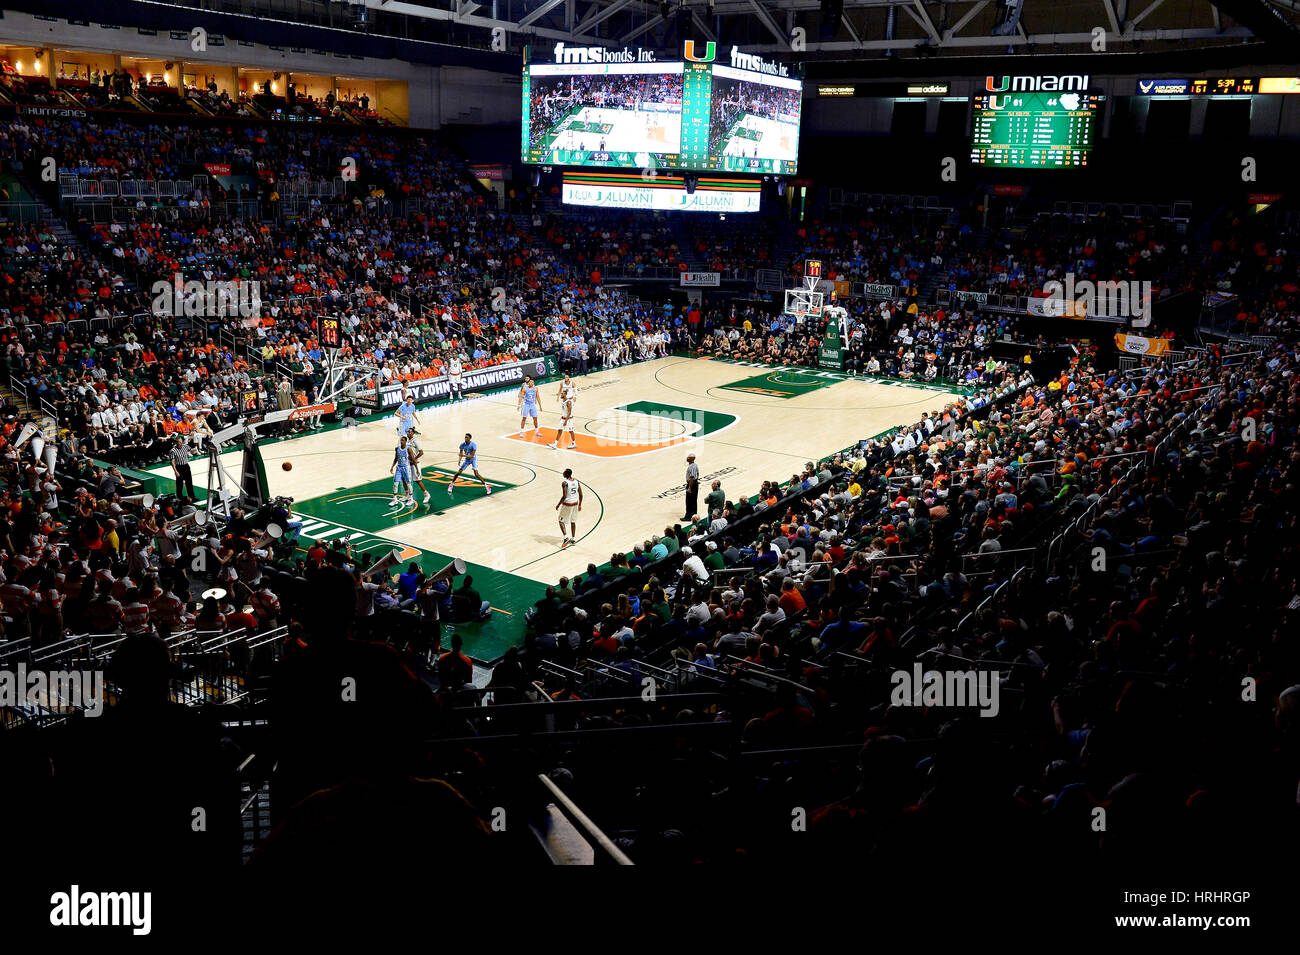 General view of the court during an ACC basketball game between the  University of Miami Hurricanes and North Carolina Tar Heels at the Watsco  Center in Coral Gables, Florida. Miami defeated North